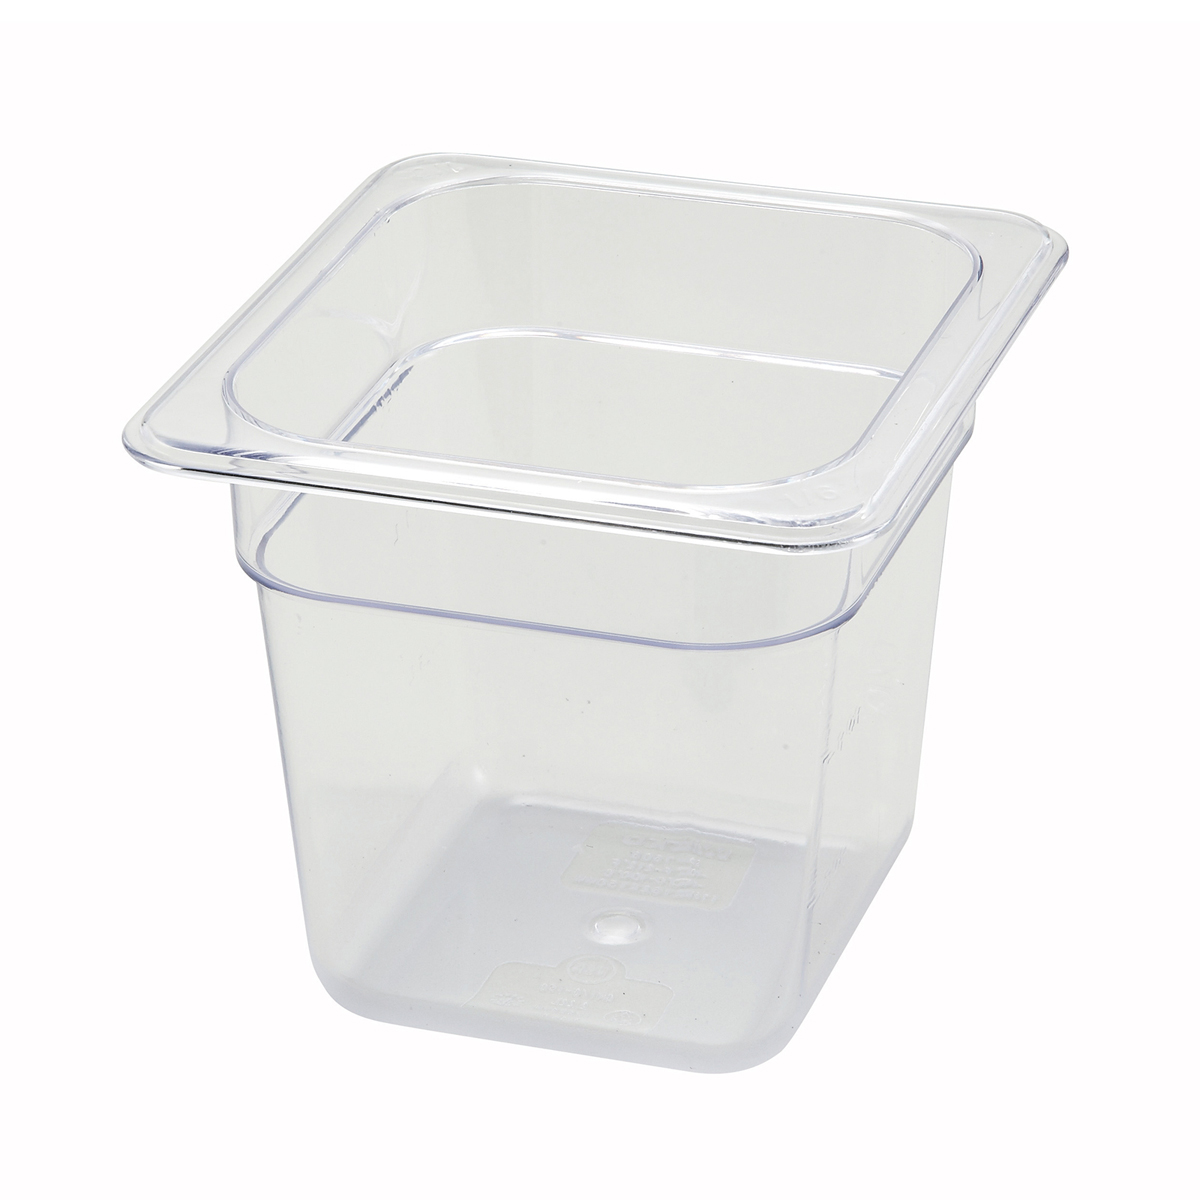 Winco SP7606 Poly-Ware Polycarbonate 1/6 Size Food Pan 5-1/2" High